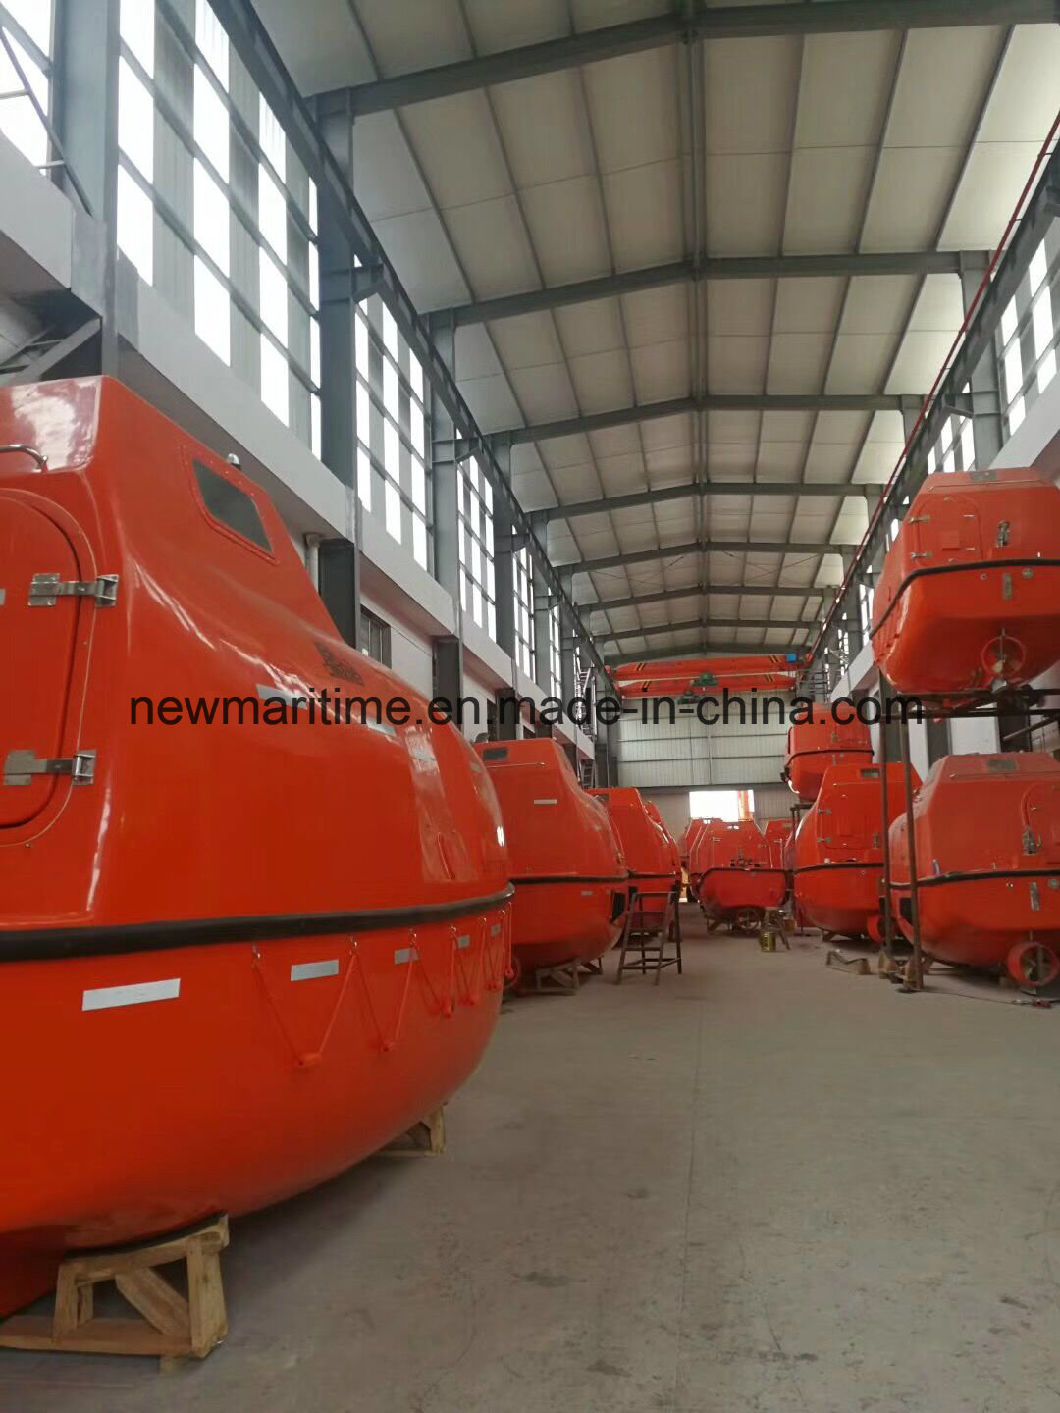 7 Meters FRP Marine Fireproof Lifeboat for Sale